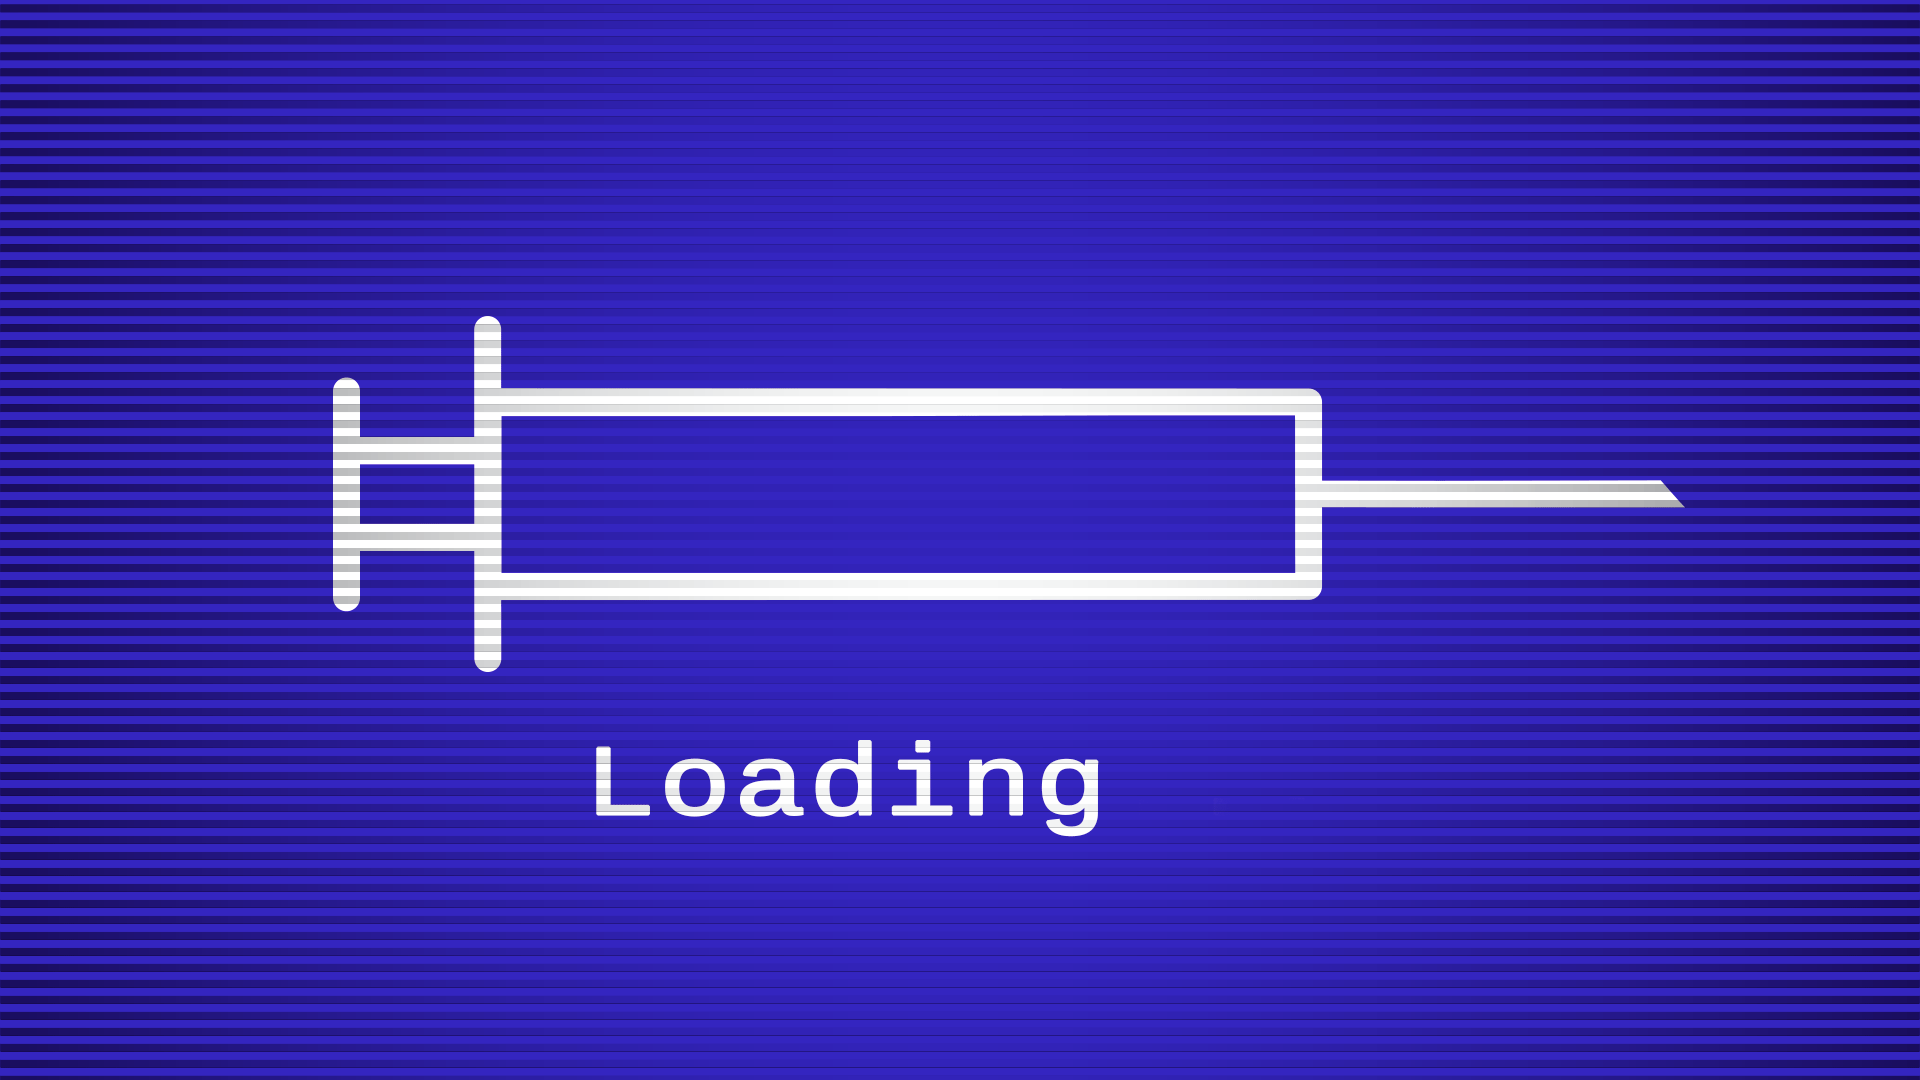 Animation of a syringe icon acting as a loading bar on a screen. 